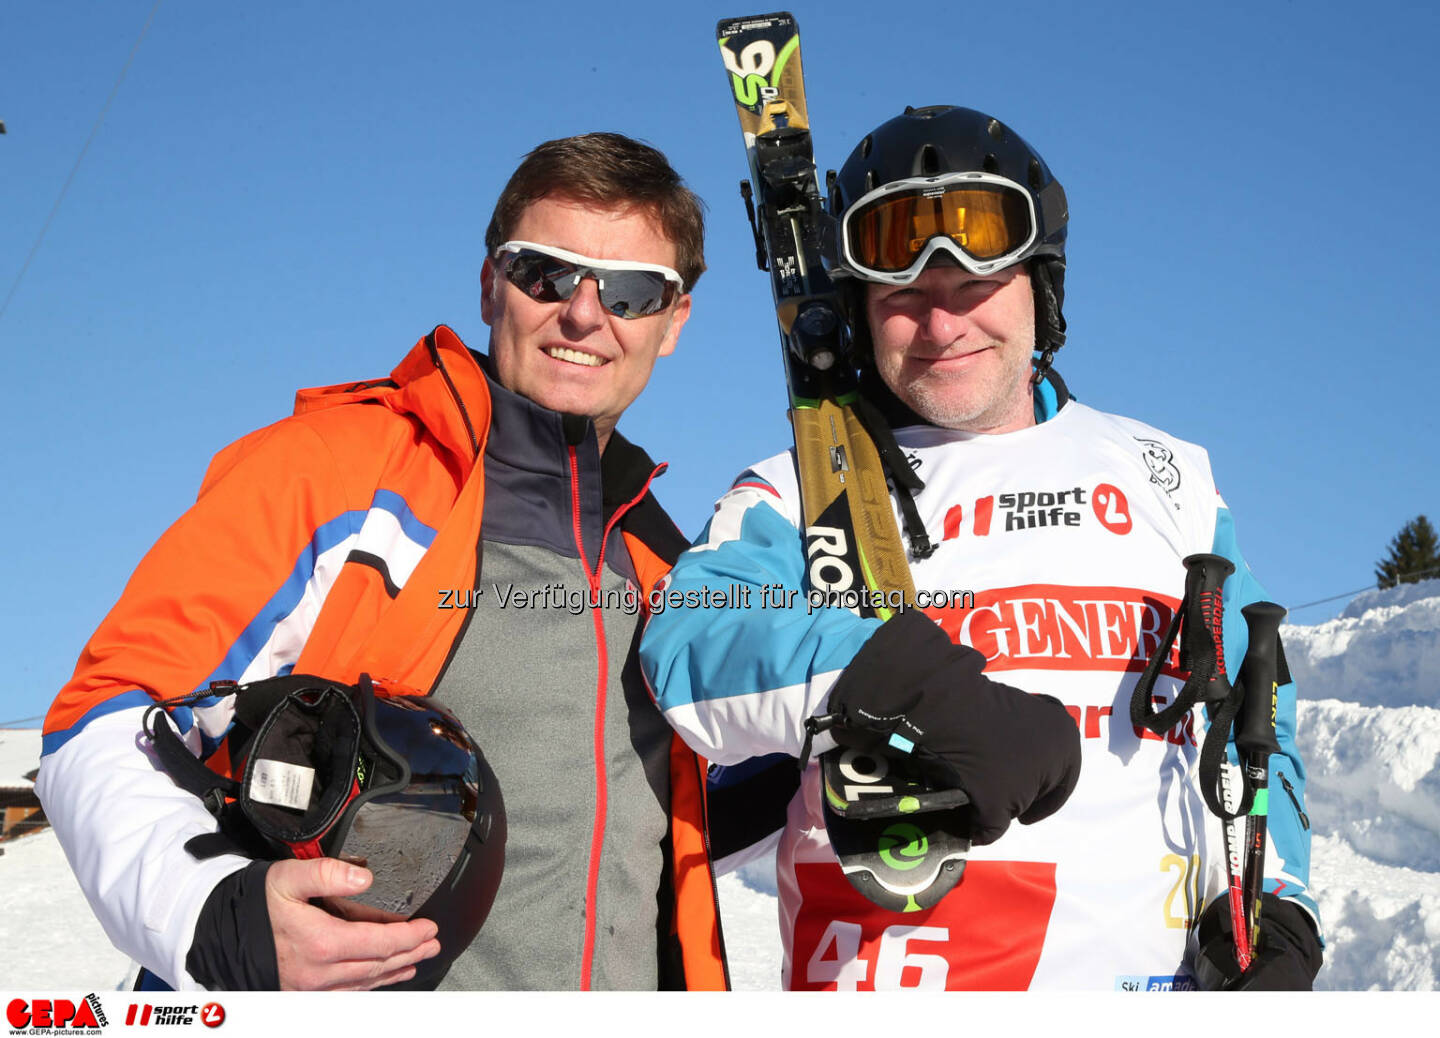 Ski for Gold Charity Race. Image shows managing director Harald Bauer (Sporthilfe) and Christoph Sauermann. Photo: GEPA pictures/ Harald Steiner